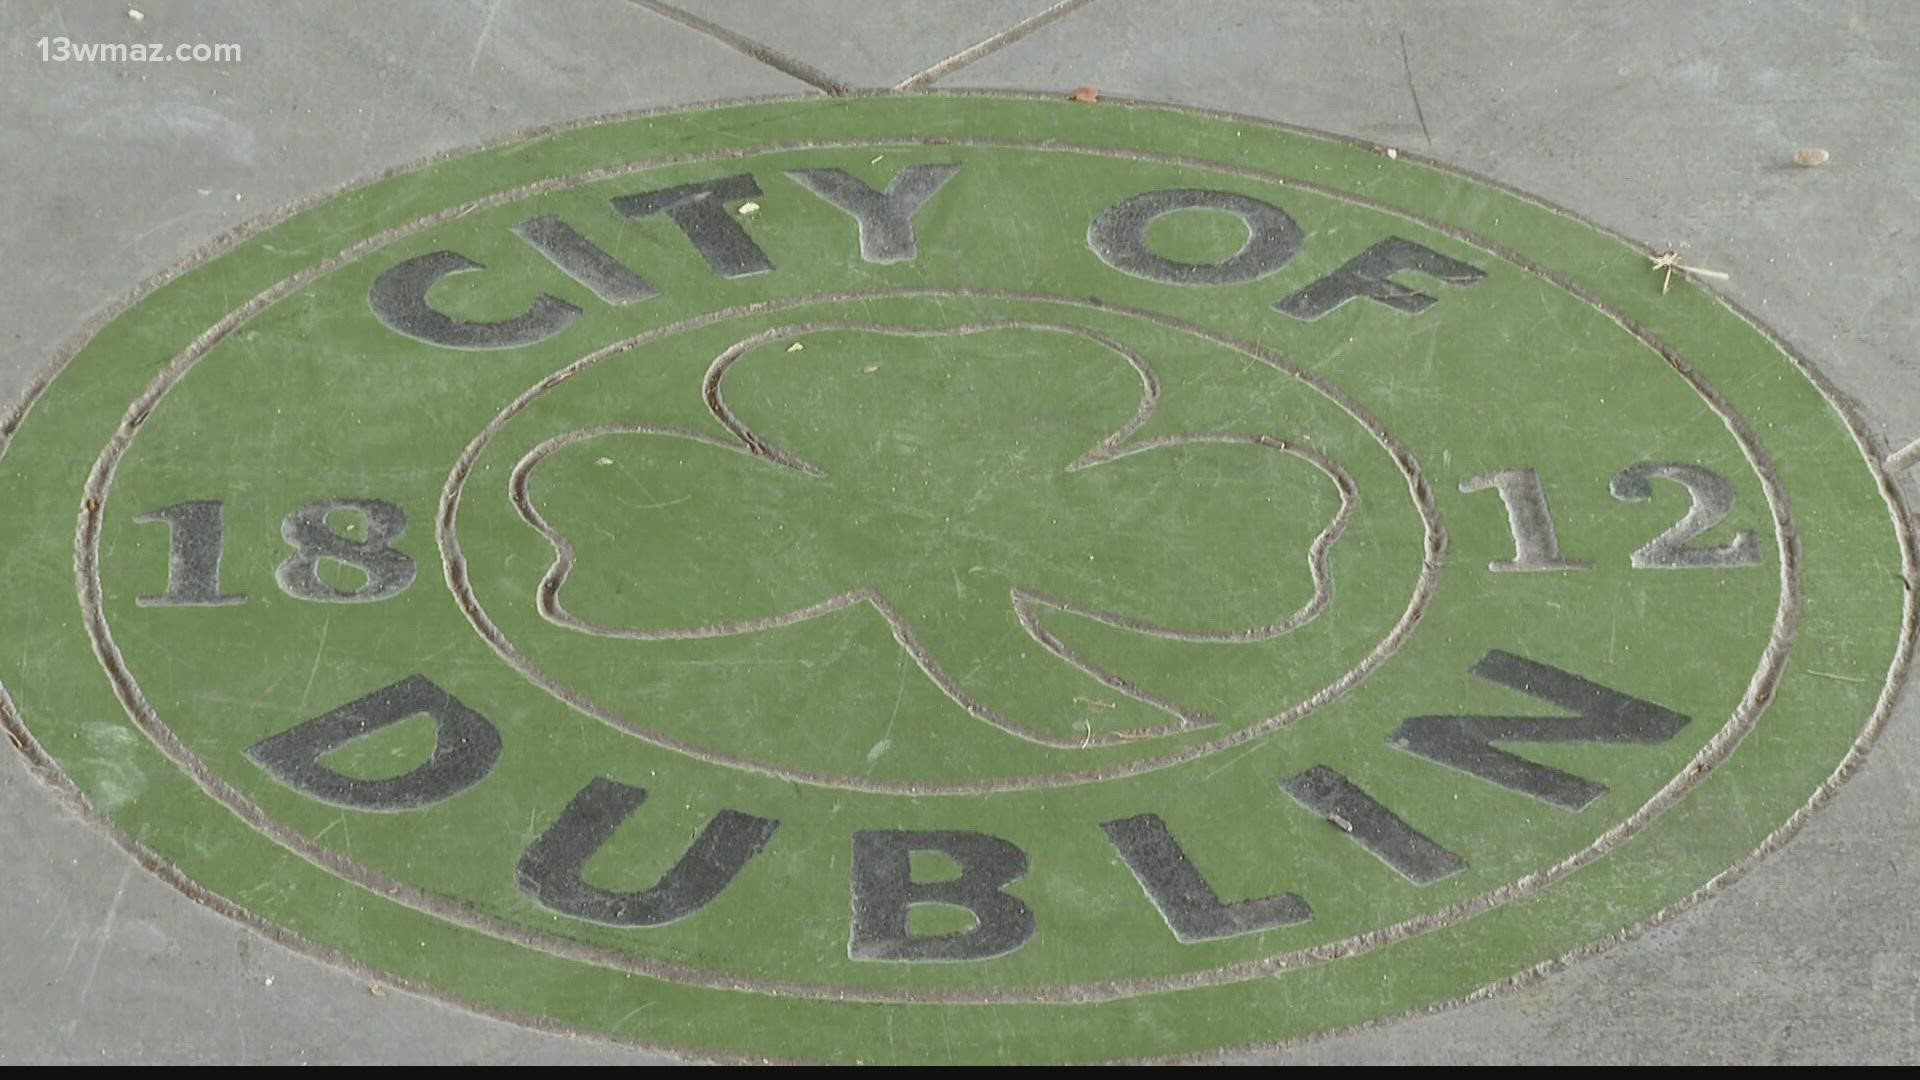 Dublin will swear in three new city council members, and all three agree they would like to see growth in Dublin.